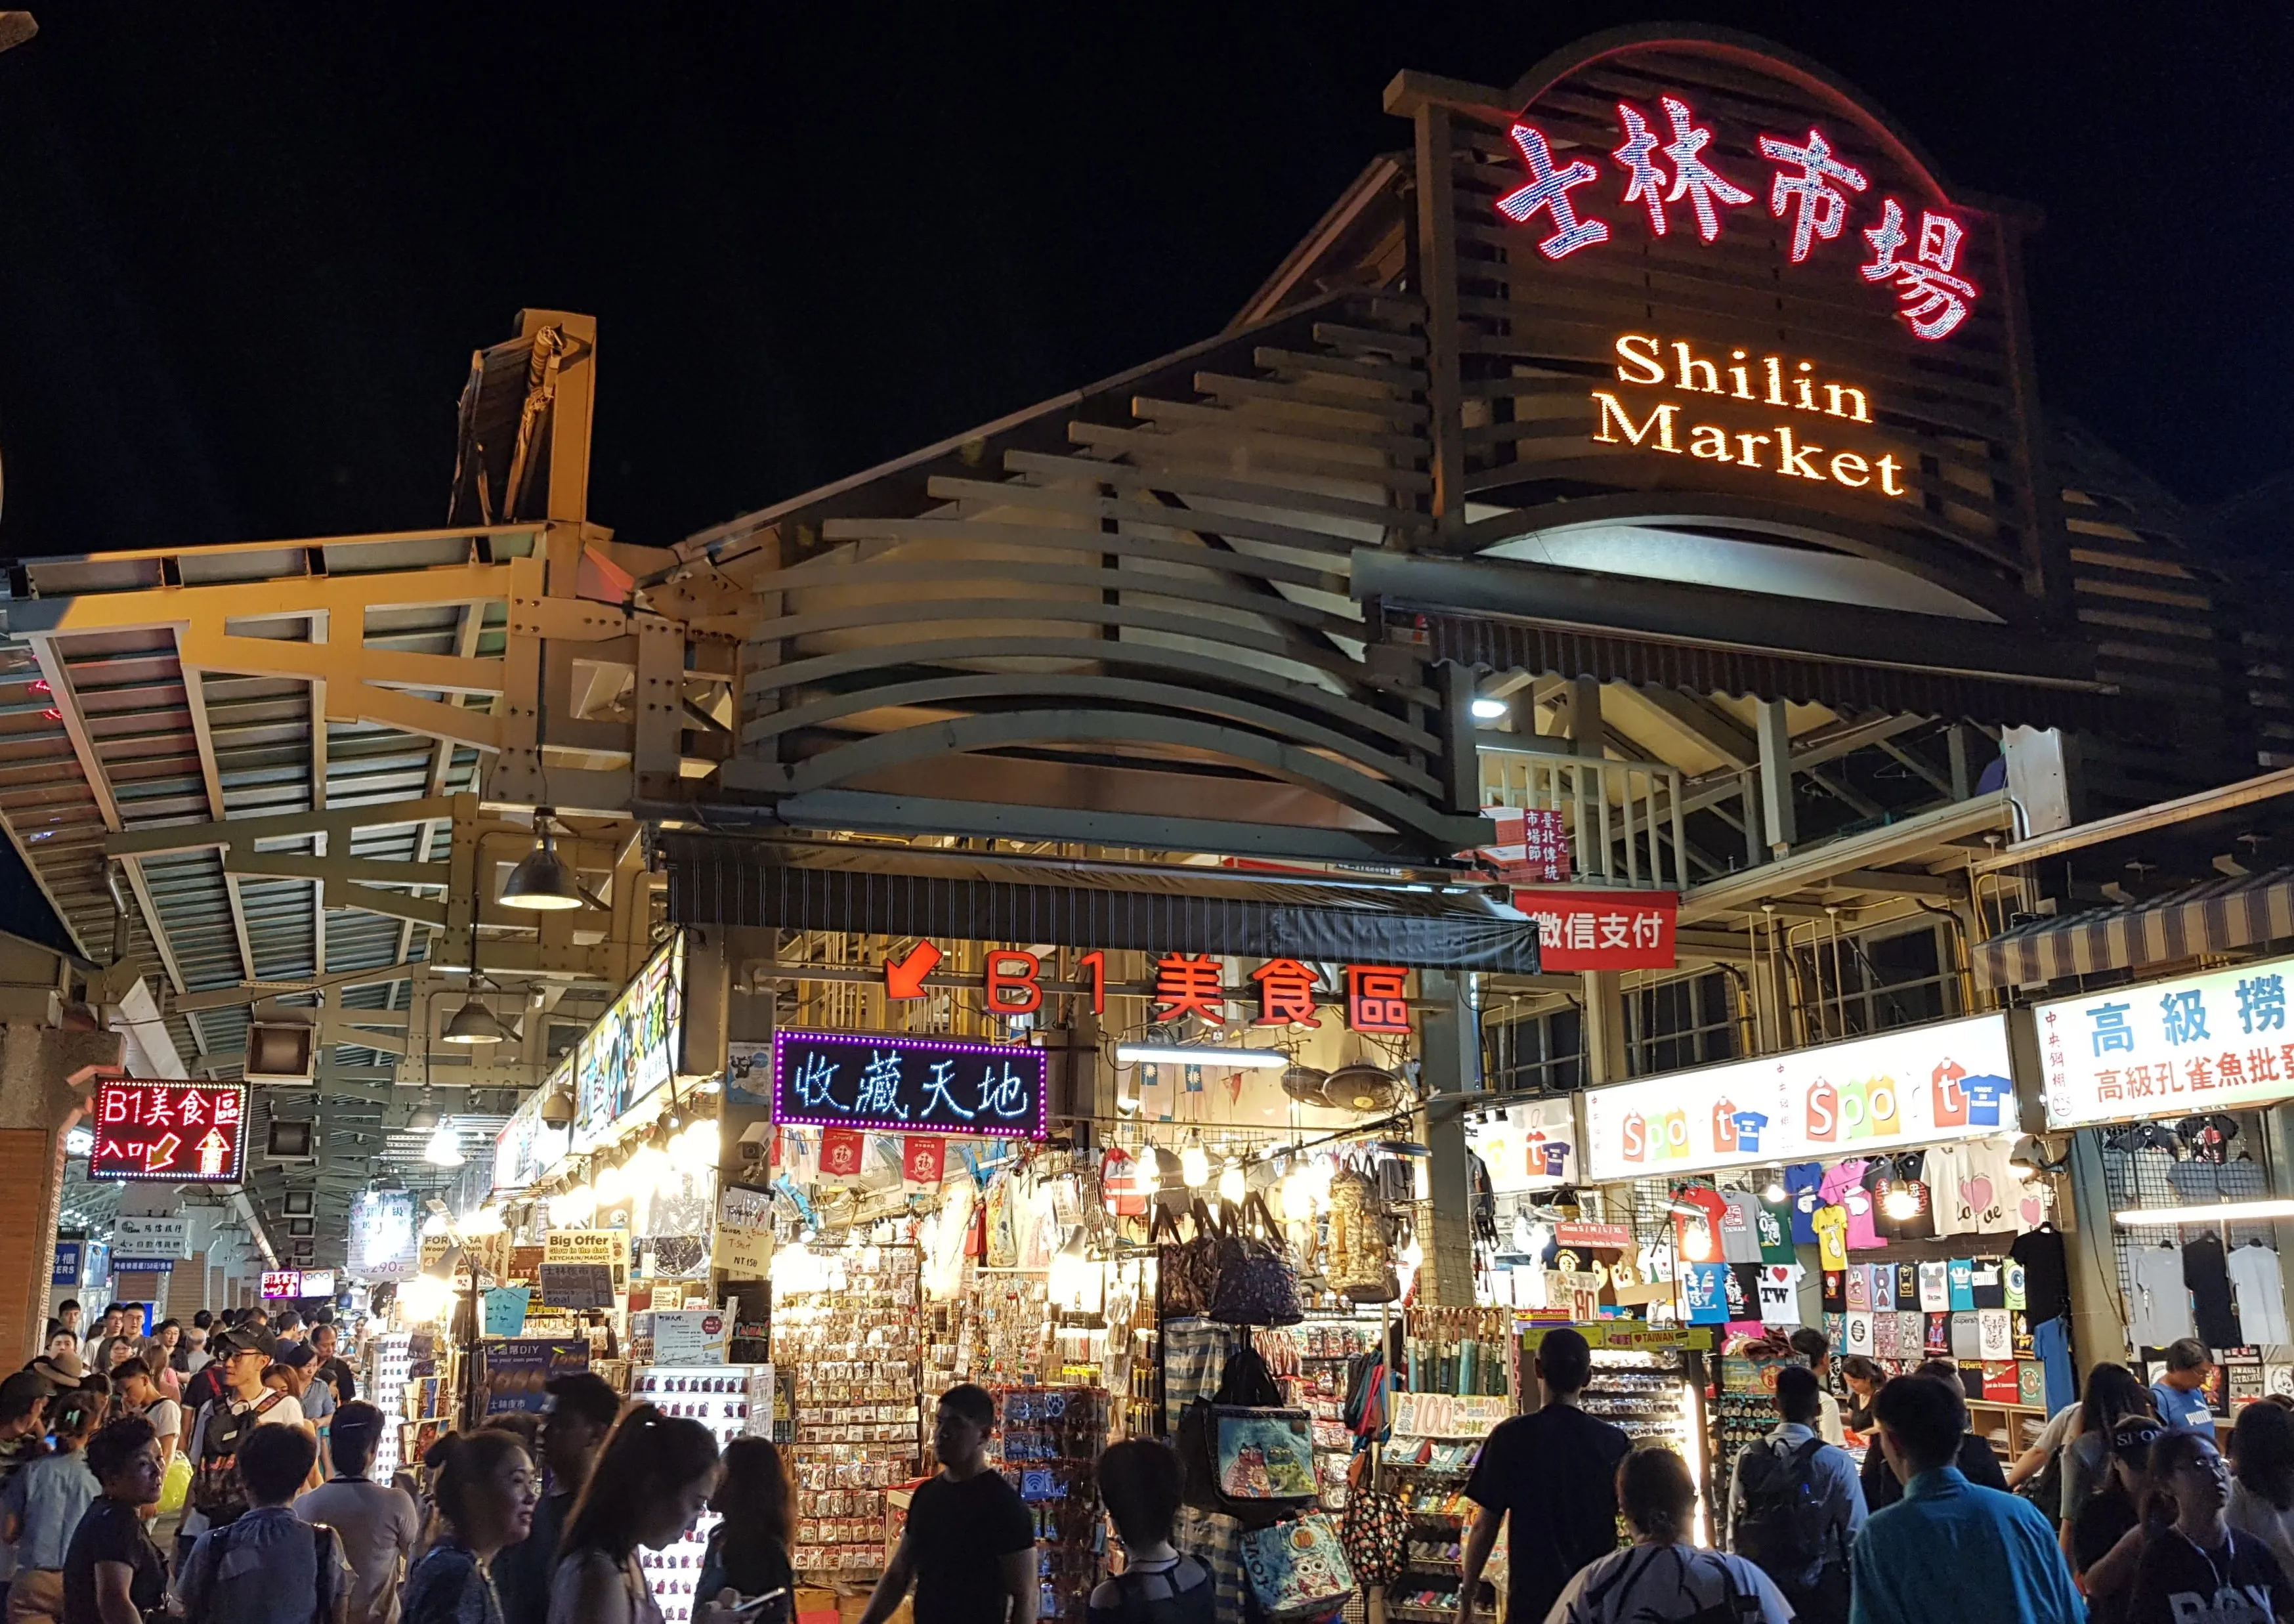 Shida Night Market in Taiwan, east_asia | Organic Food,Baked Goods,Clothes,Home Decor,Beverages,Natural Beauty Products - Country Helper